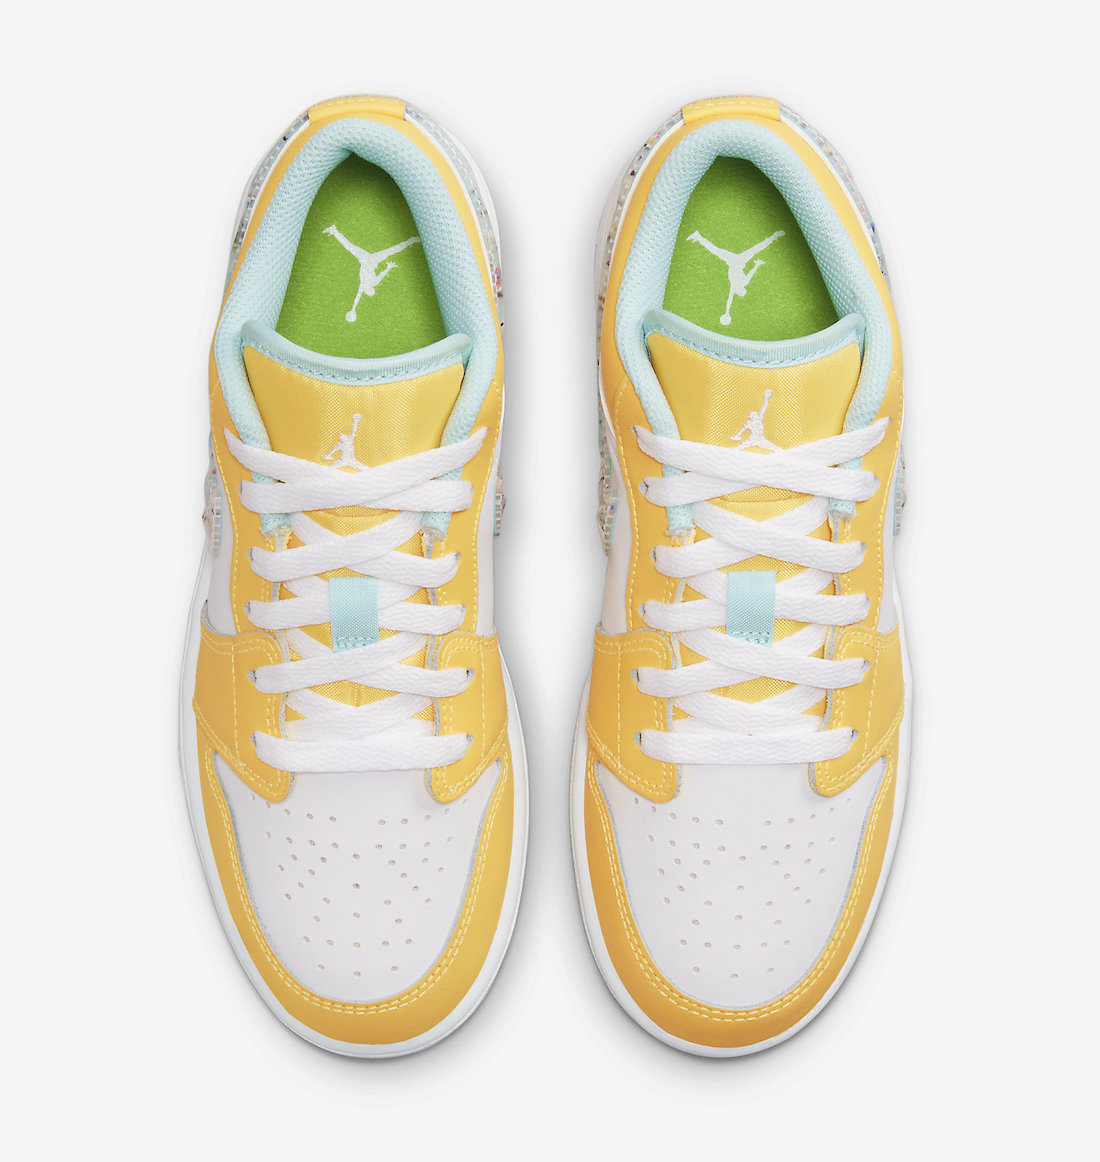 Air Jordan 1 Low GS Yellow White DX4375-800 Release Date + Where to Buy ...